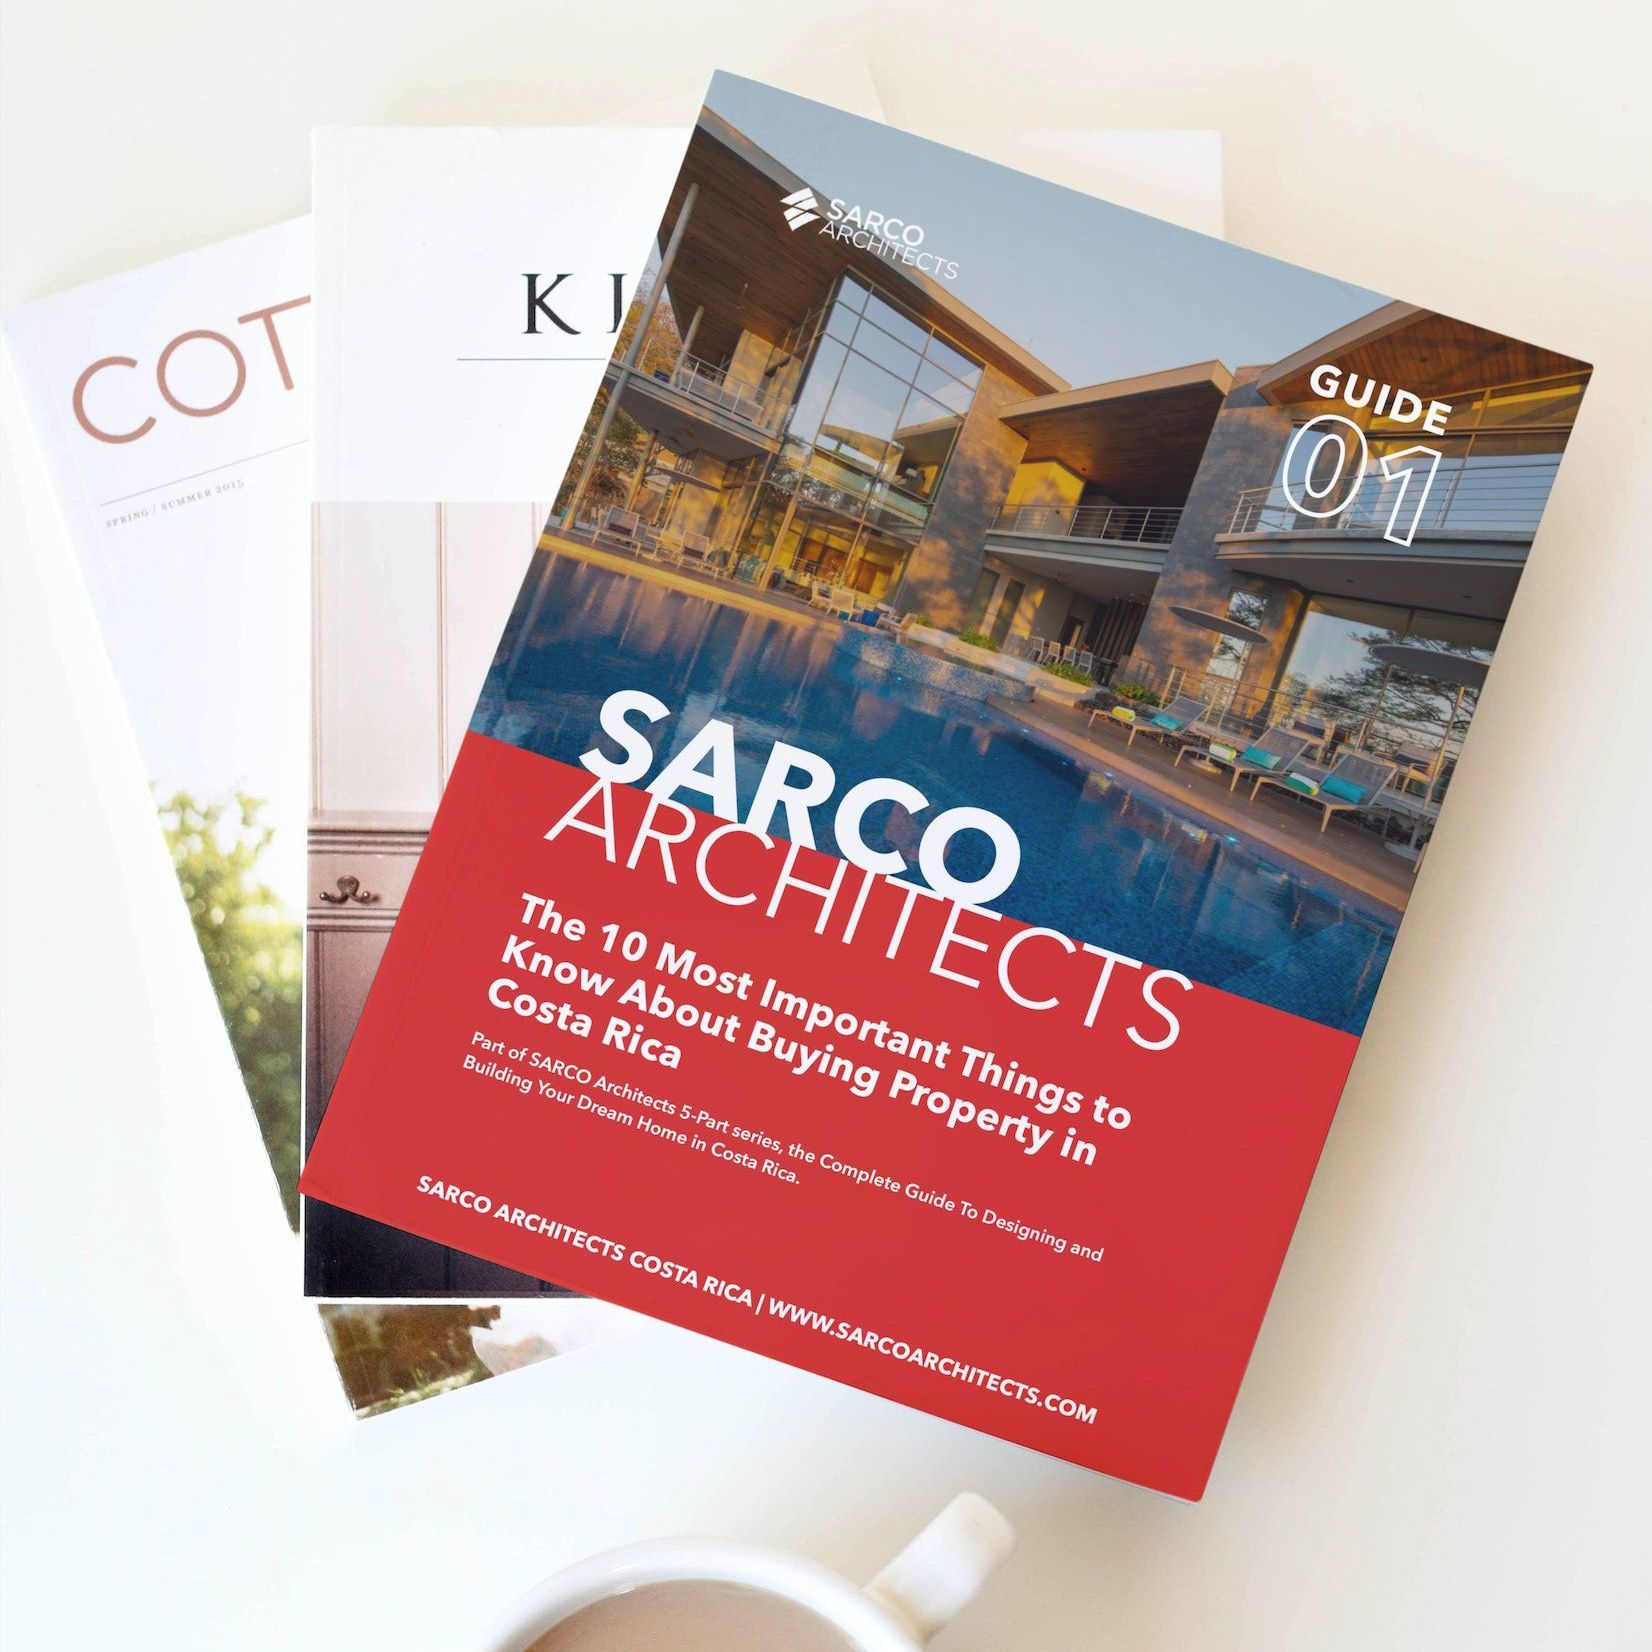 a book titled sarco architects sits on a table next to a cup of coffee